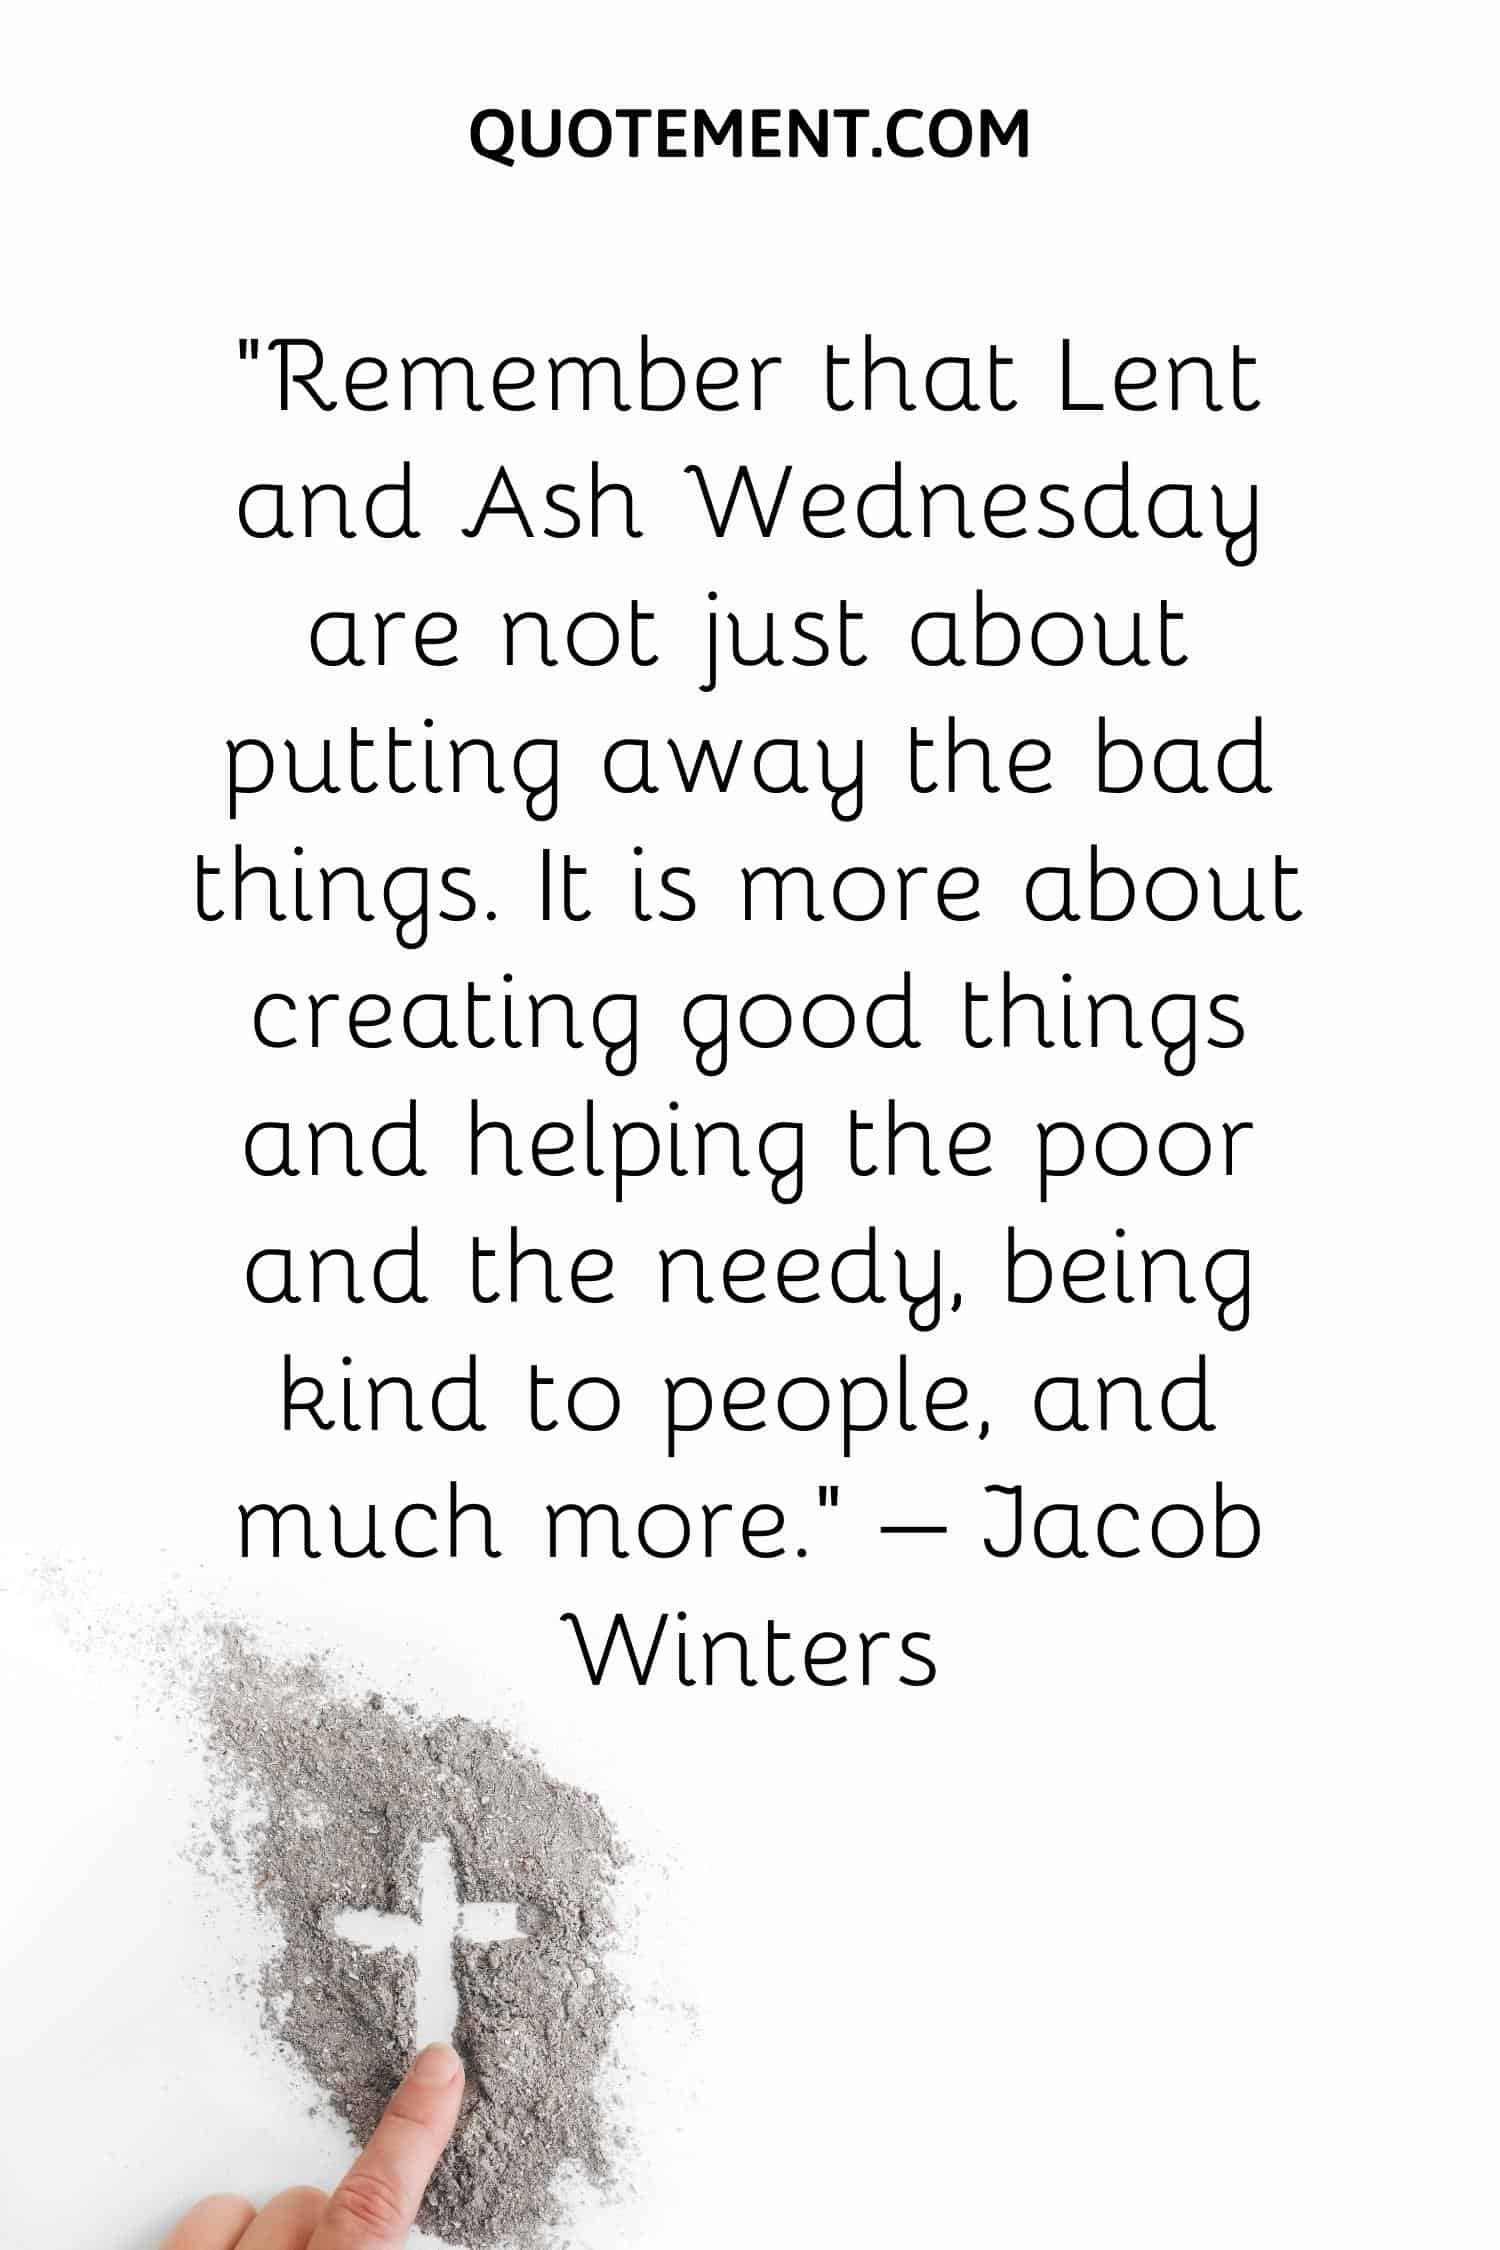 Remember that Lent and Ash Wednesday are not just about putting away the bad things